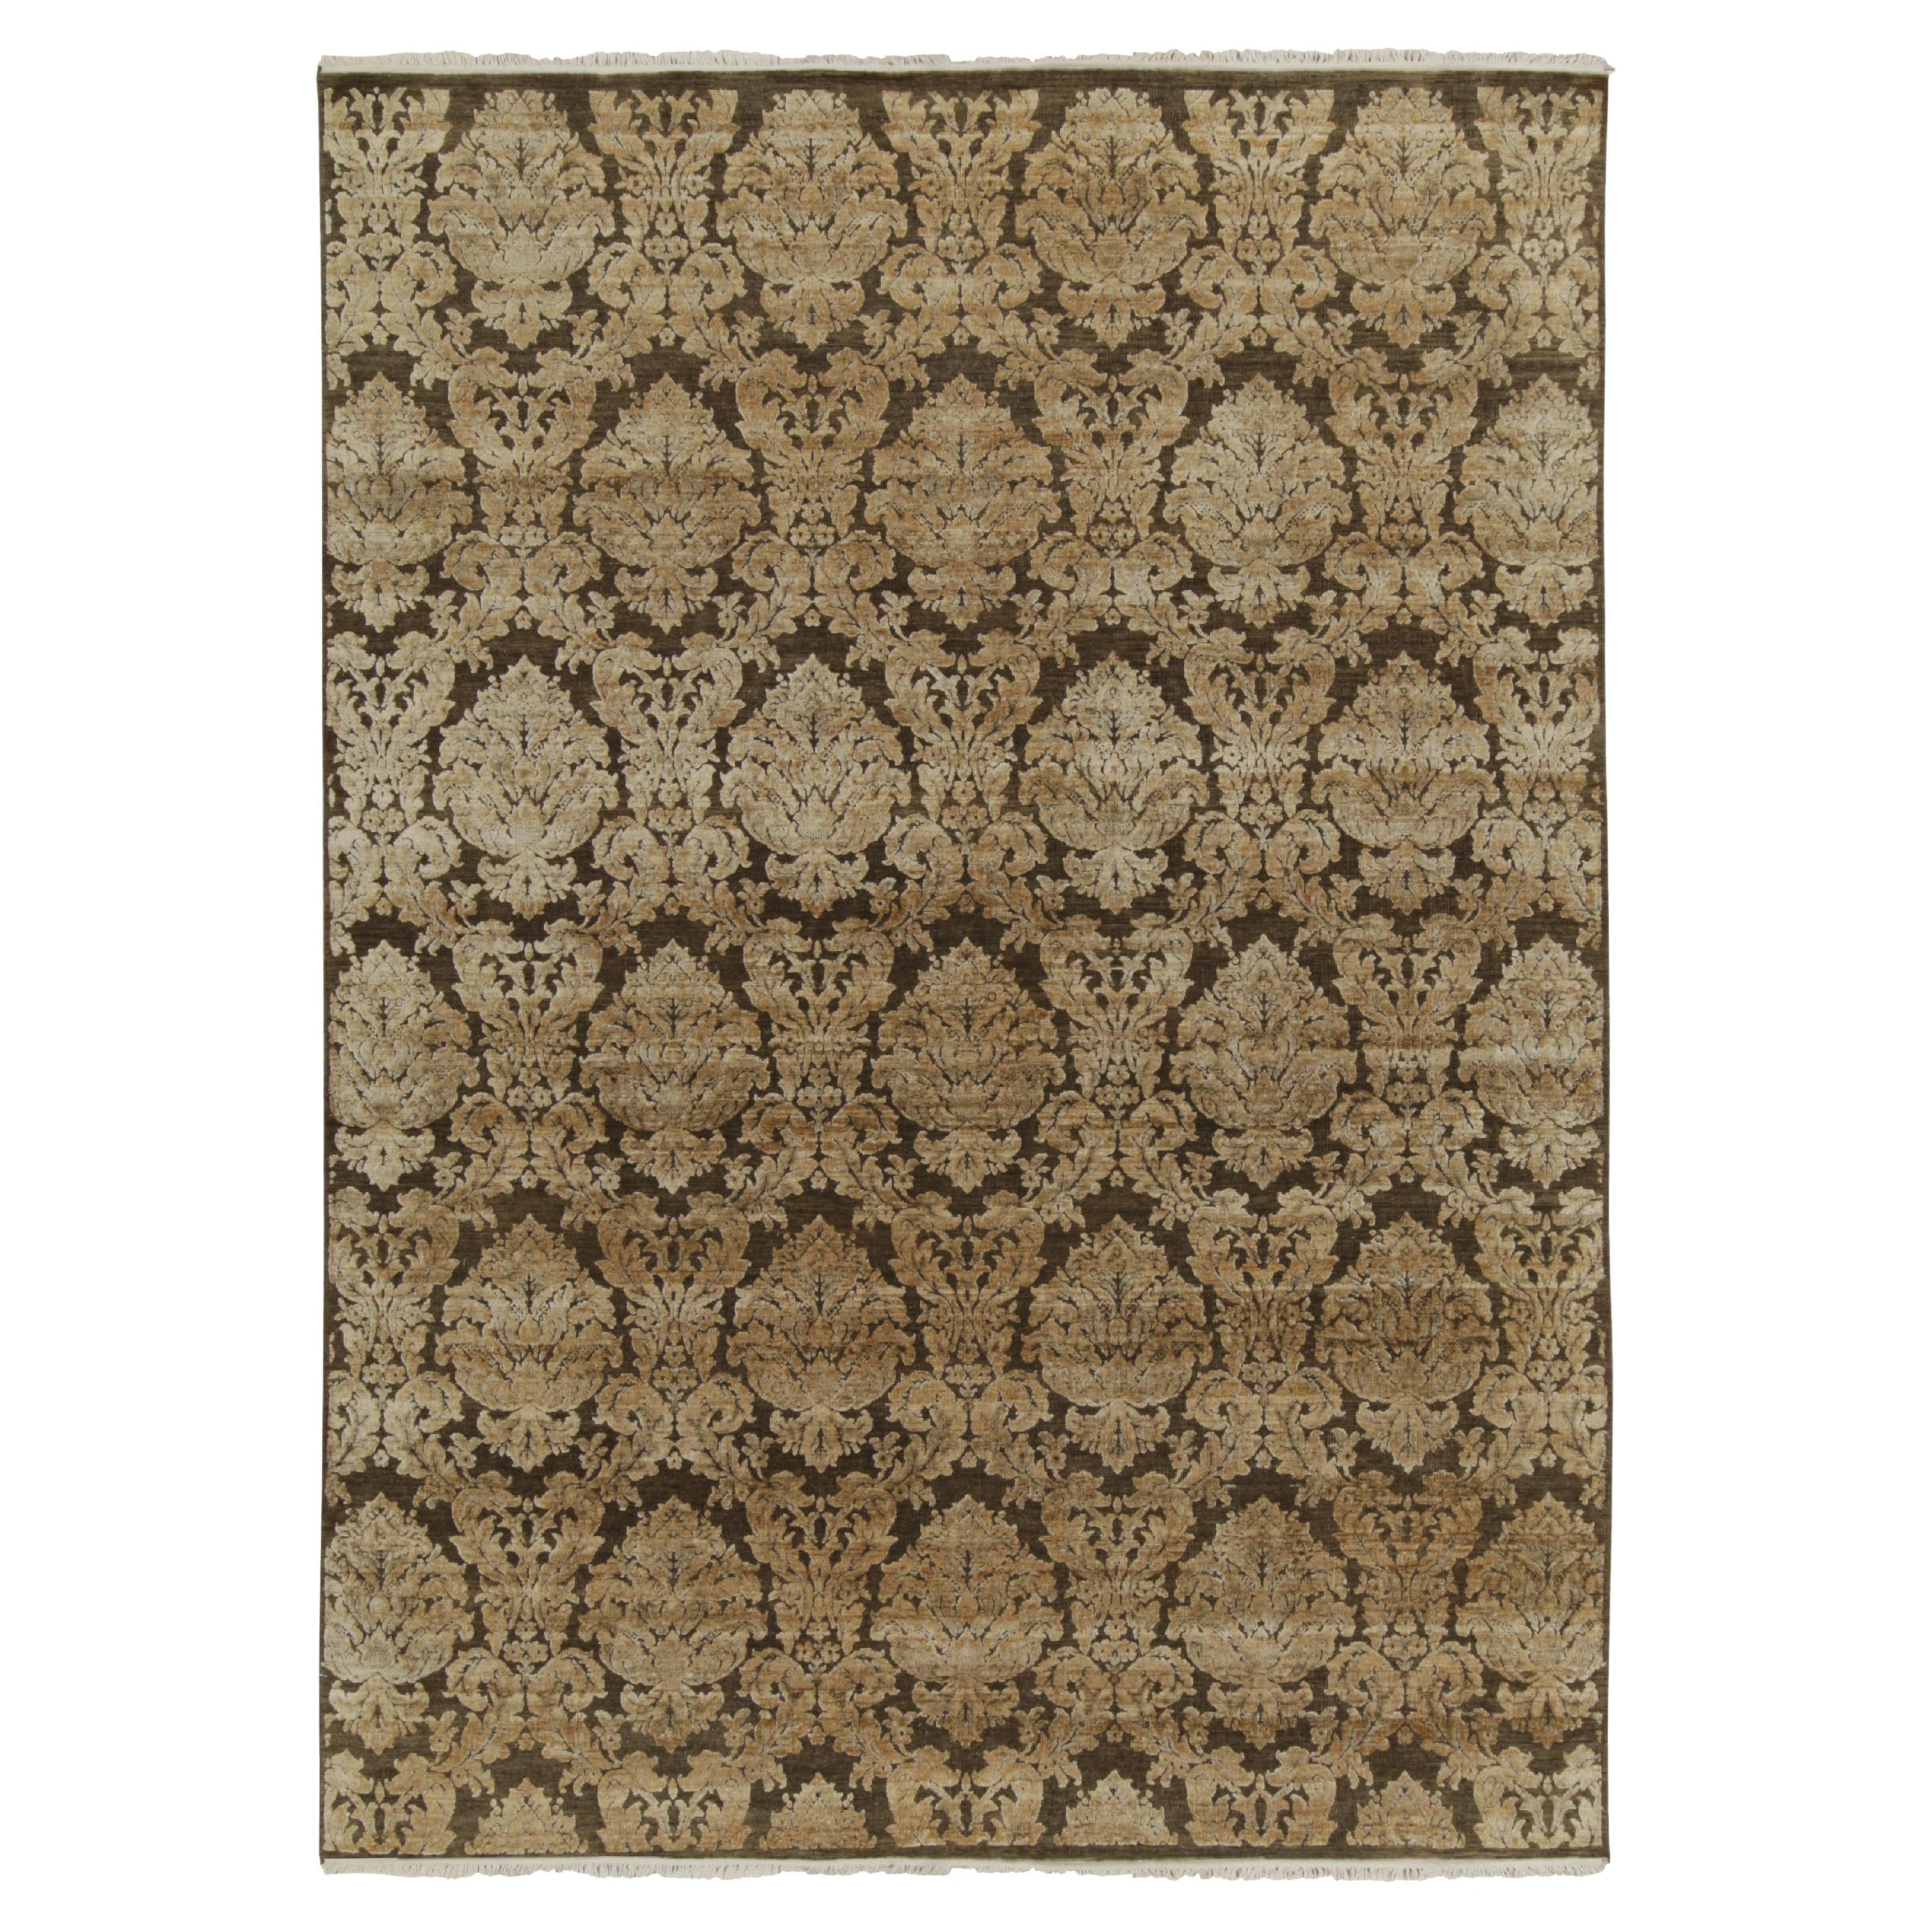 Rug & Kilim’s Classic Italian style rug in Brown with Gold Floral Patterns For Sale